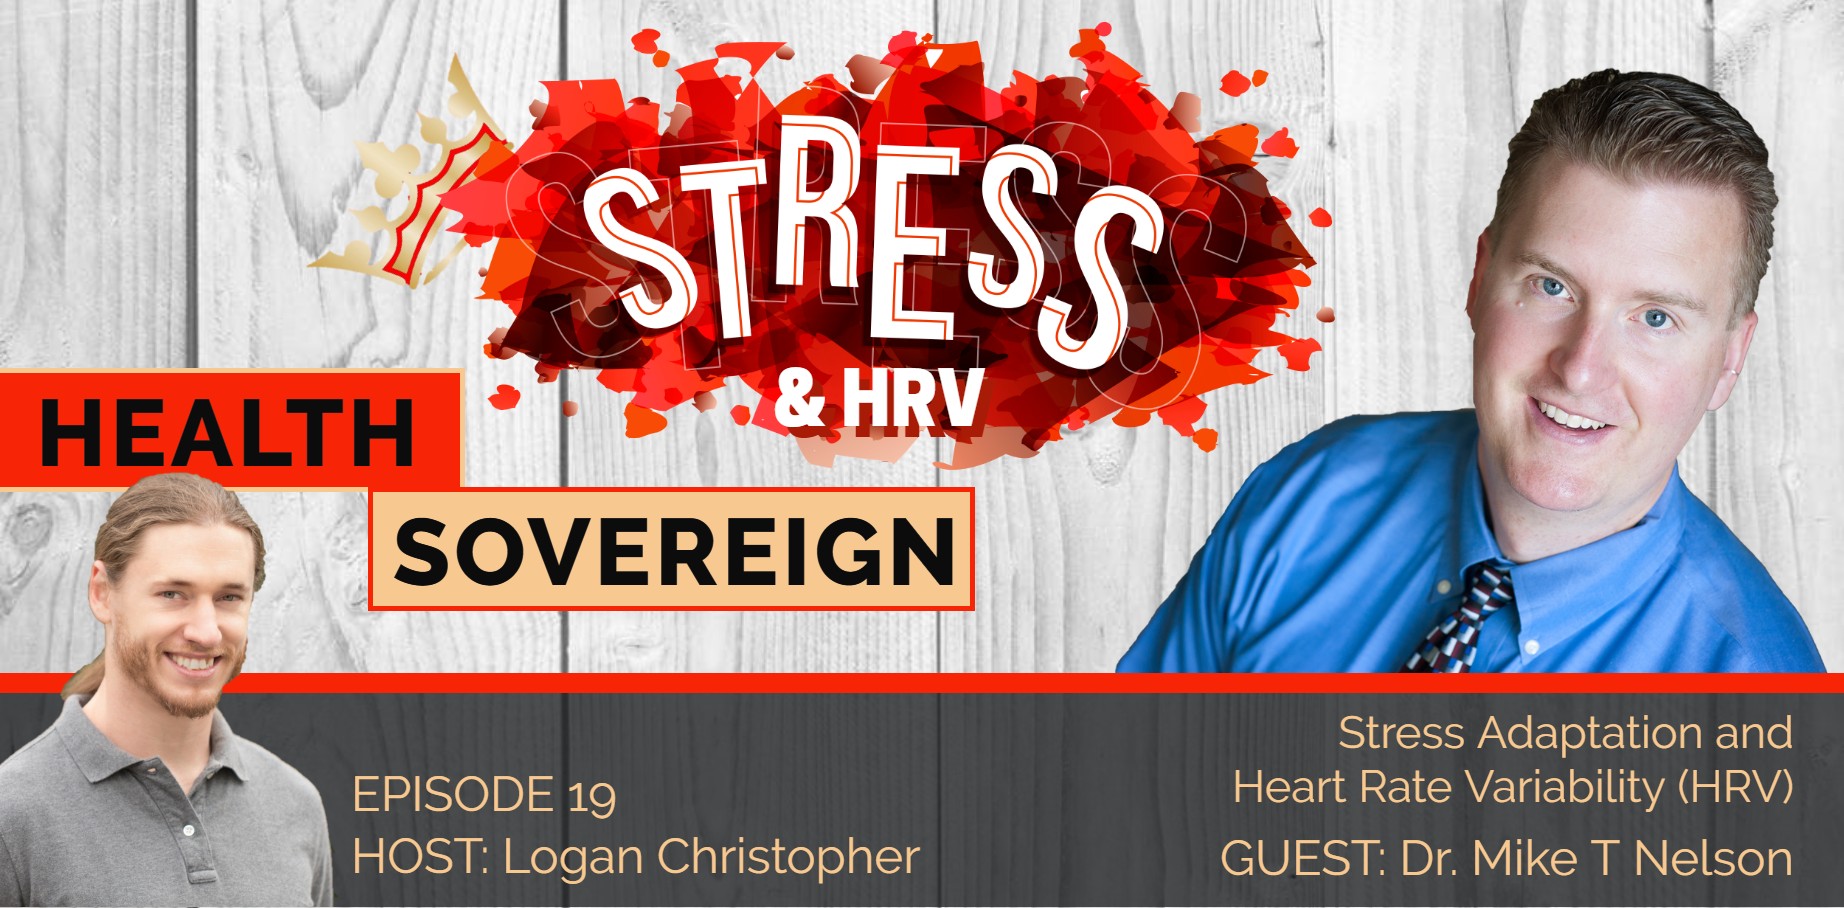 Episode 19: Stress & Heart Rate Variability (HRV)